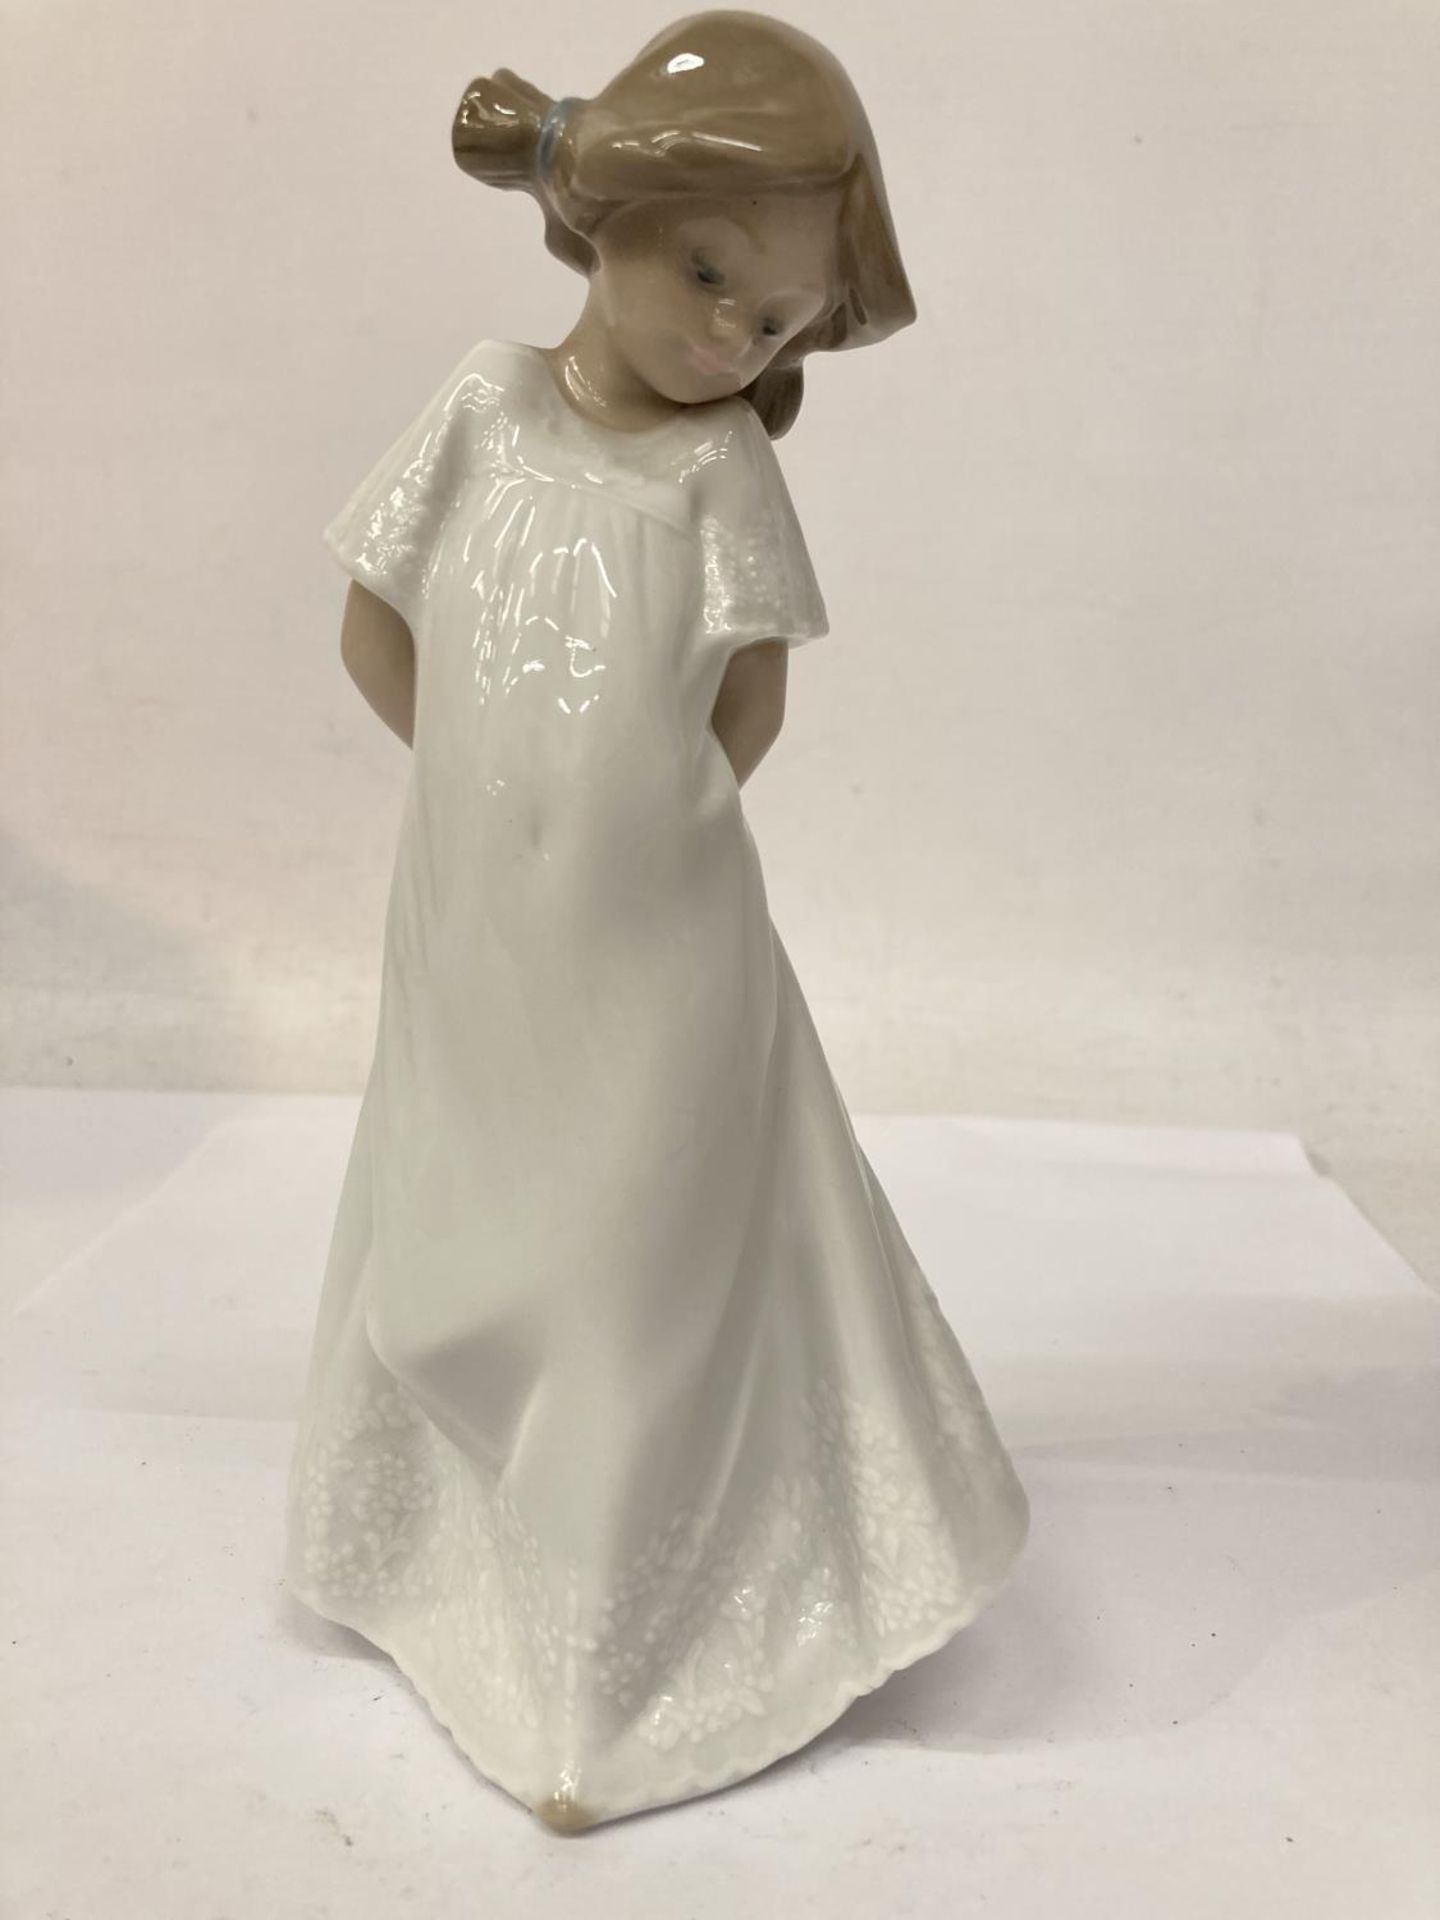 A NAO GIRL IN GOWN FIGURE